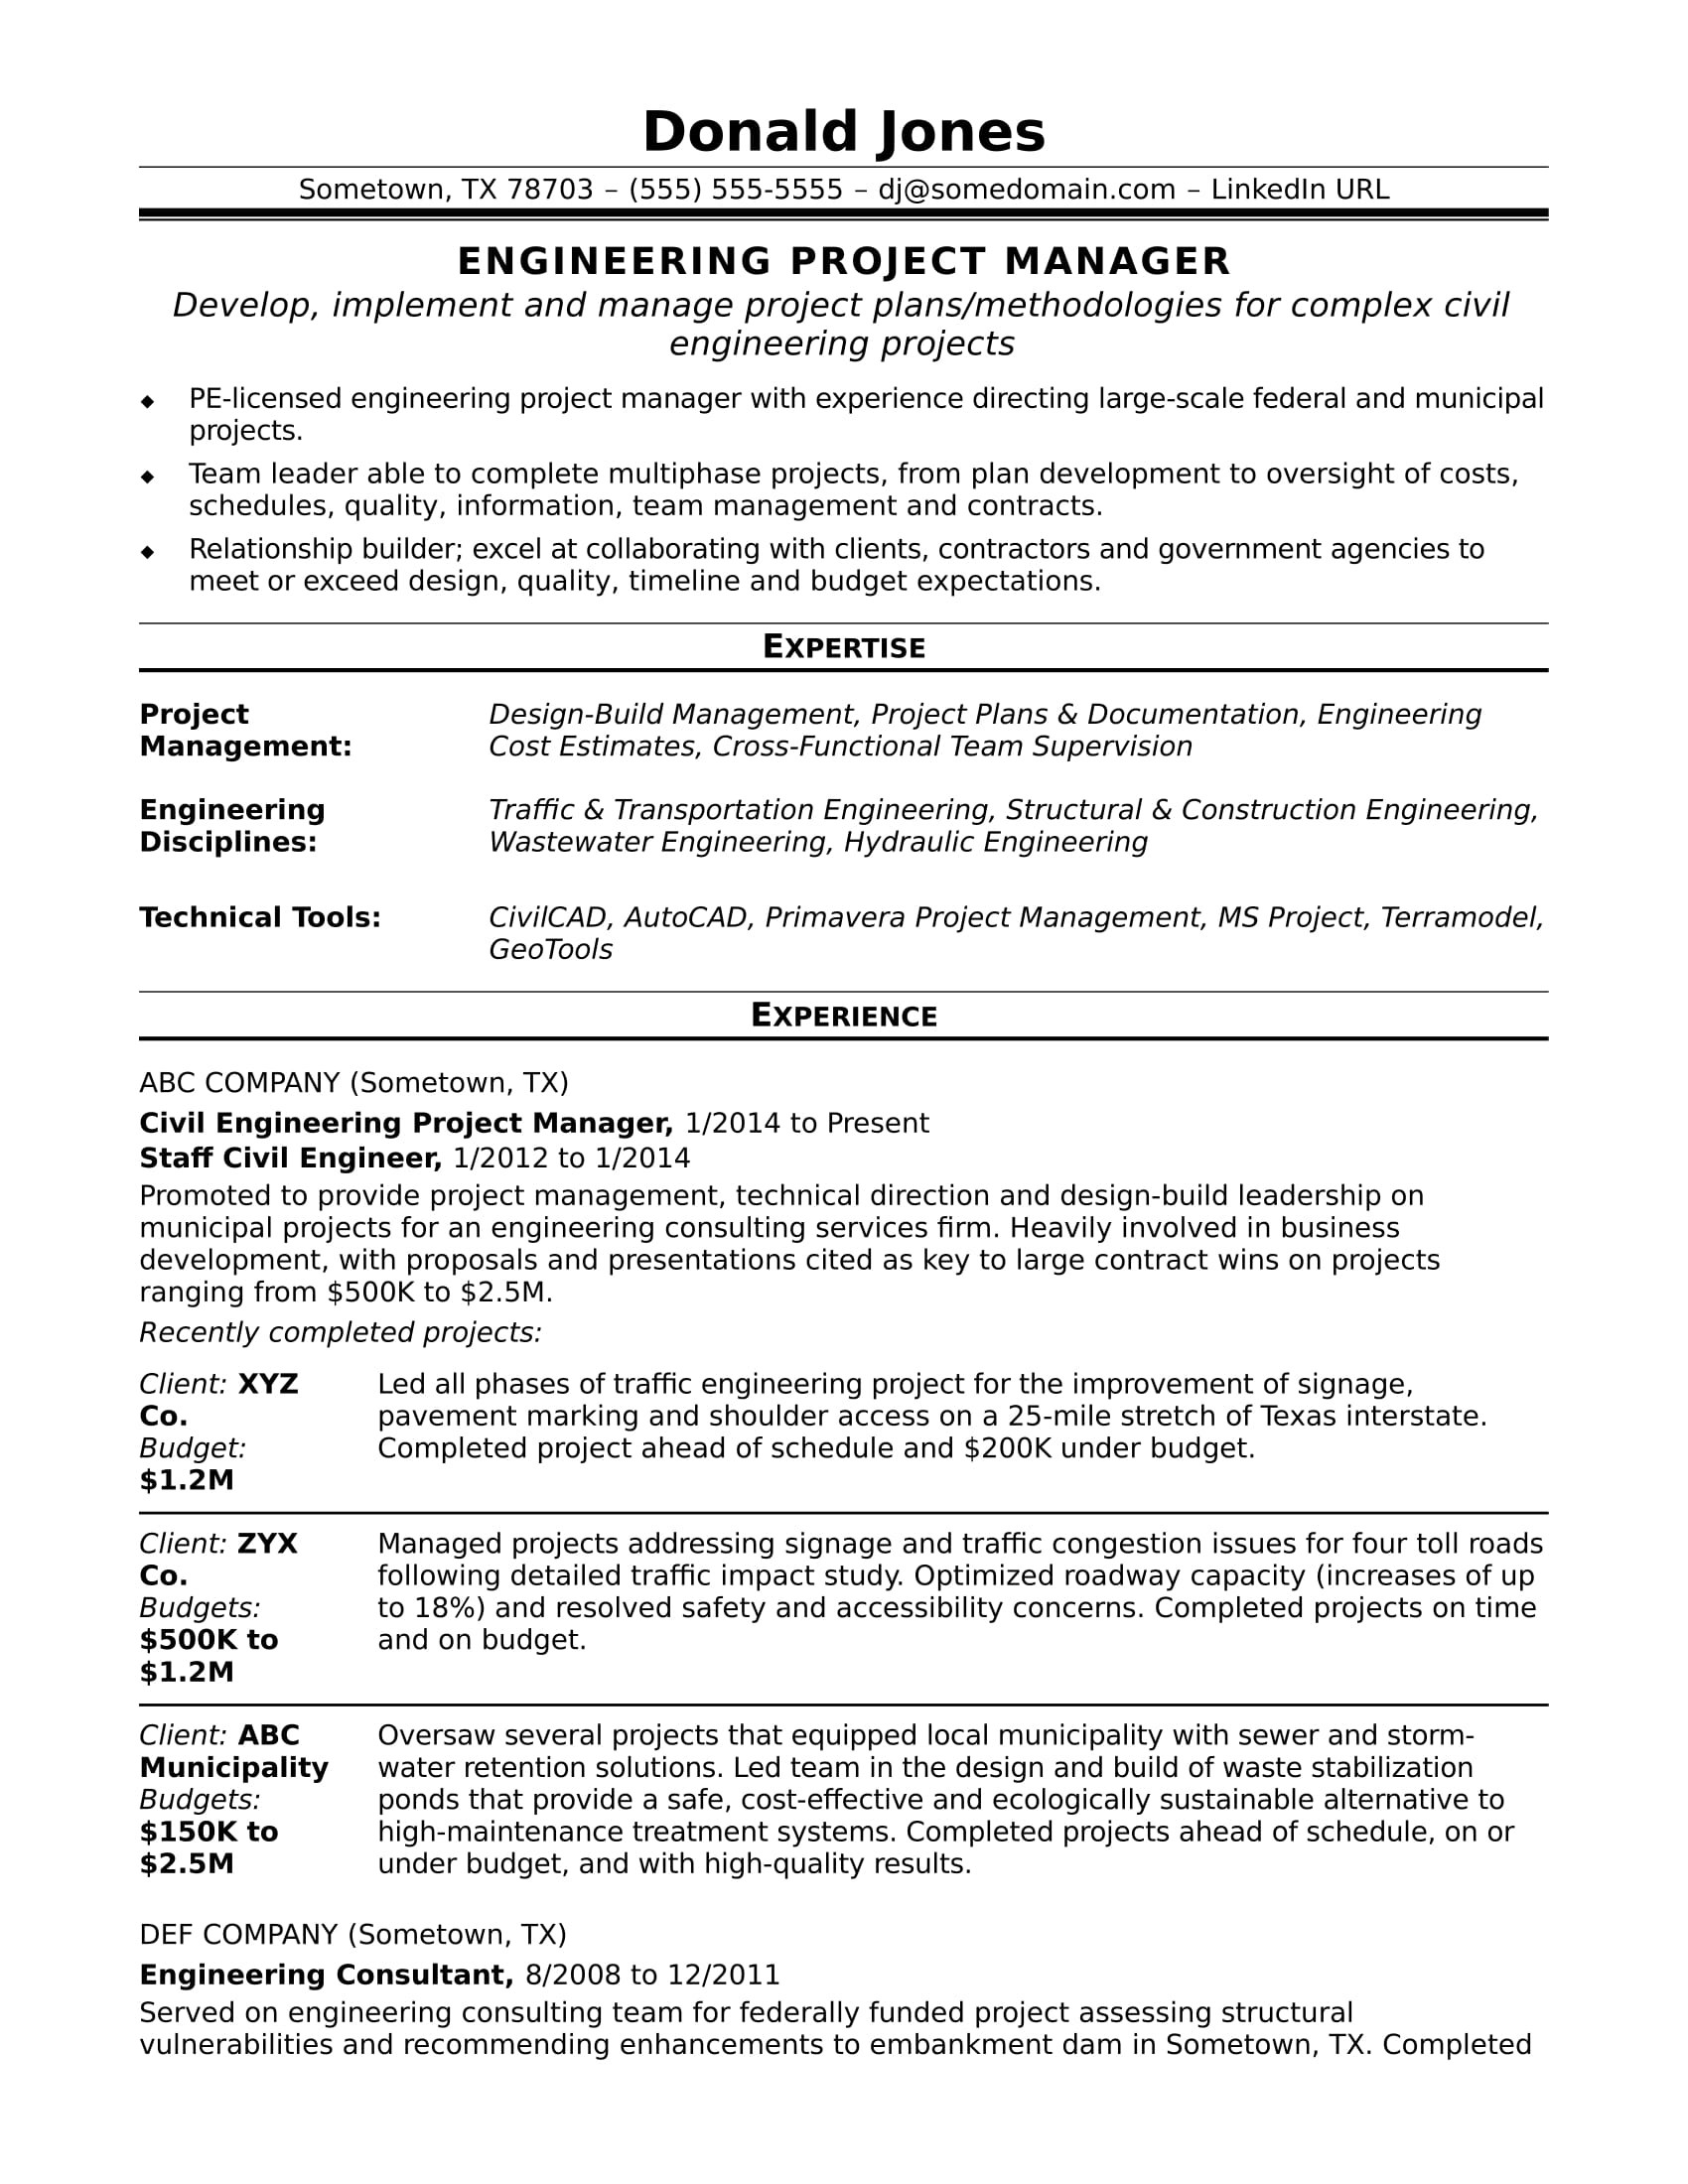 Engineering Manager Resume Samples Sample Resume for A Midlevel Engineering Project Manager